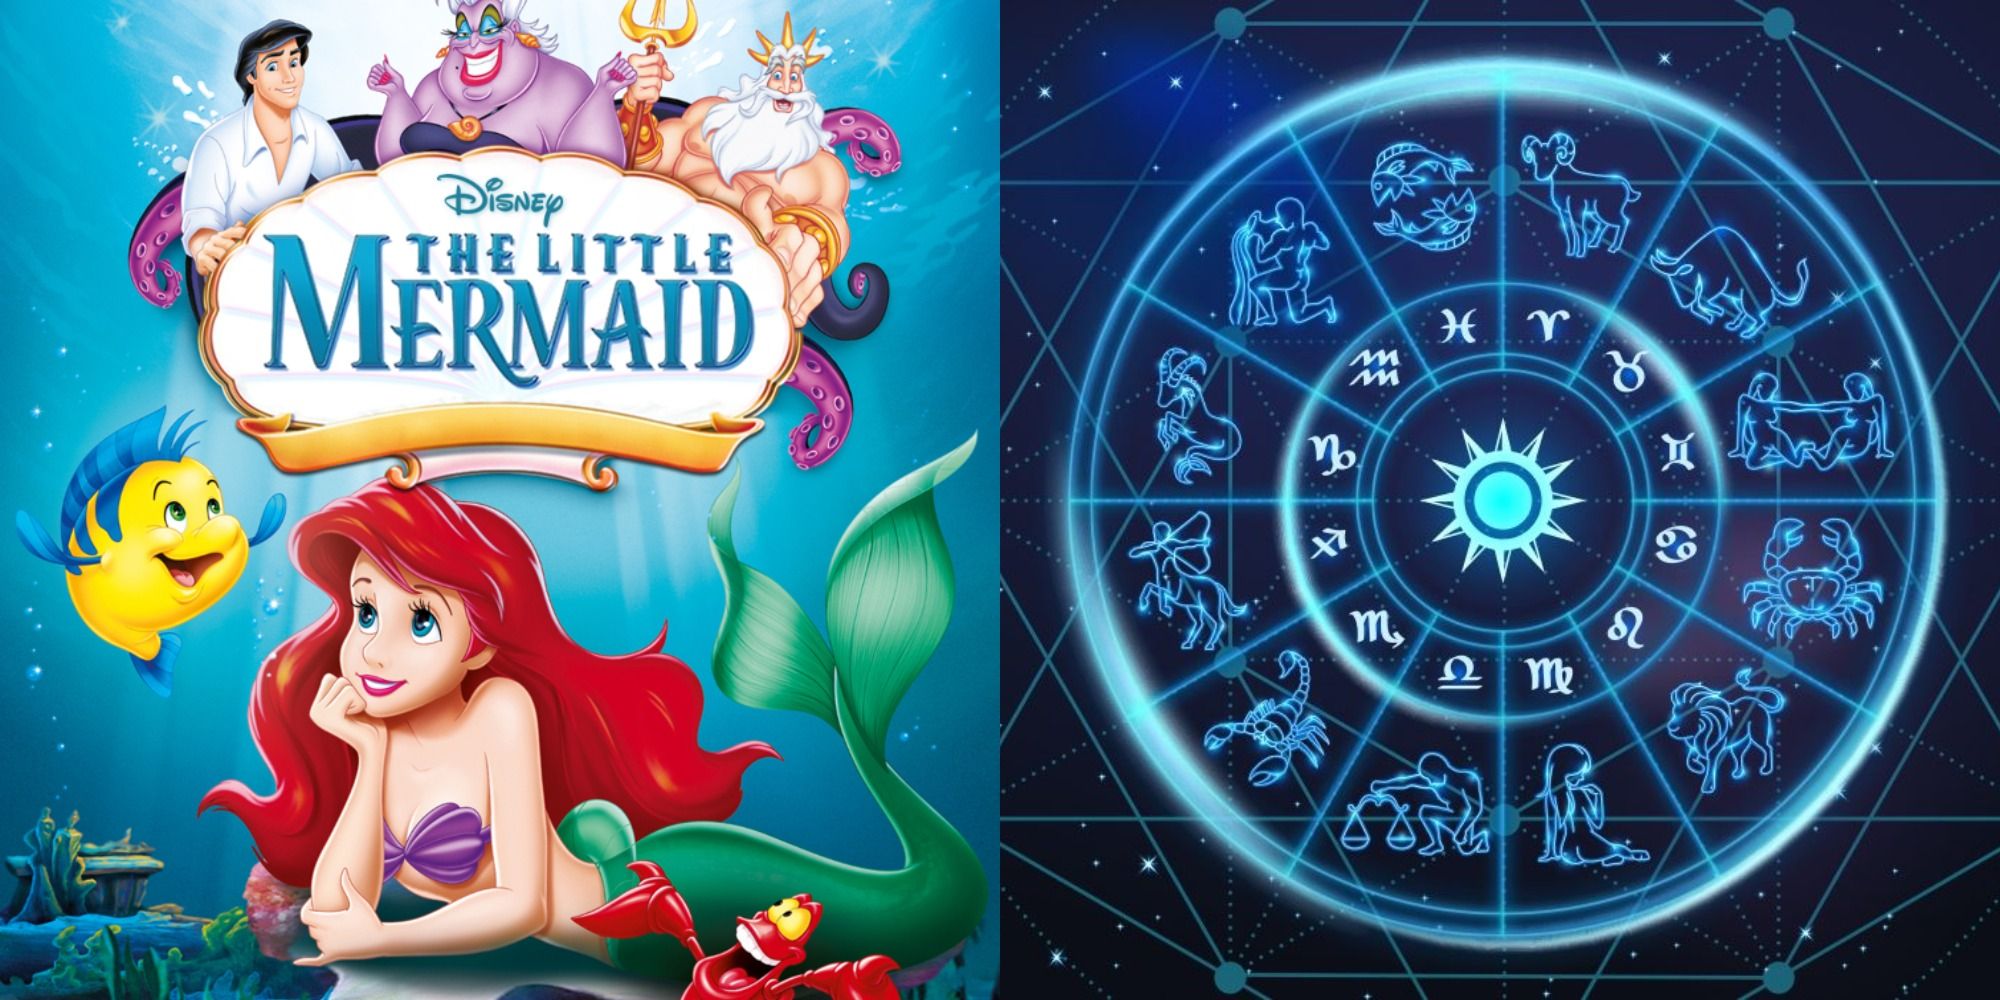 Split image showing a poster for The Little Mermaid and a zodiac wheel